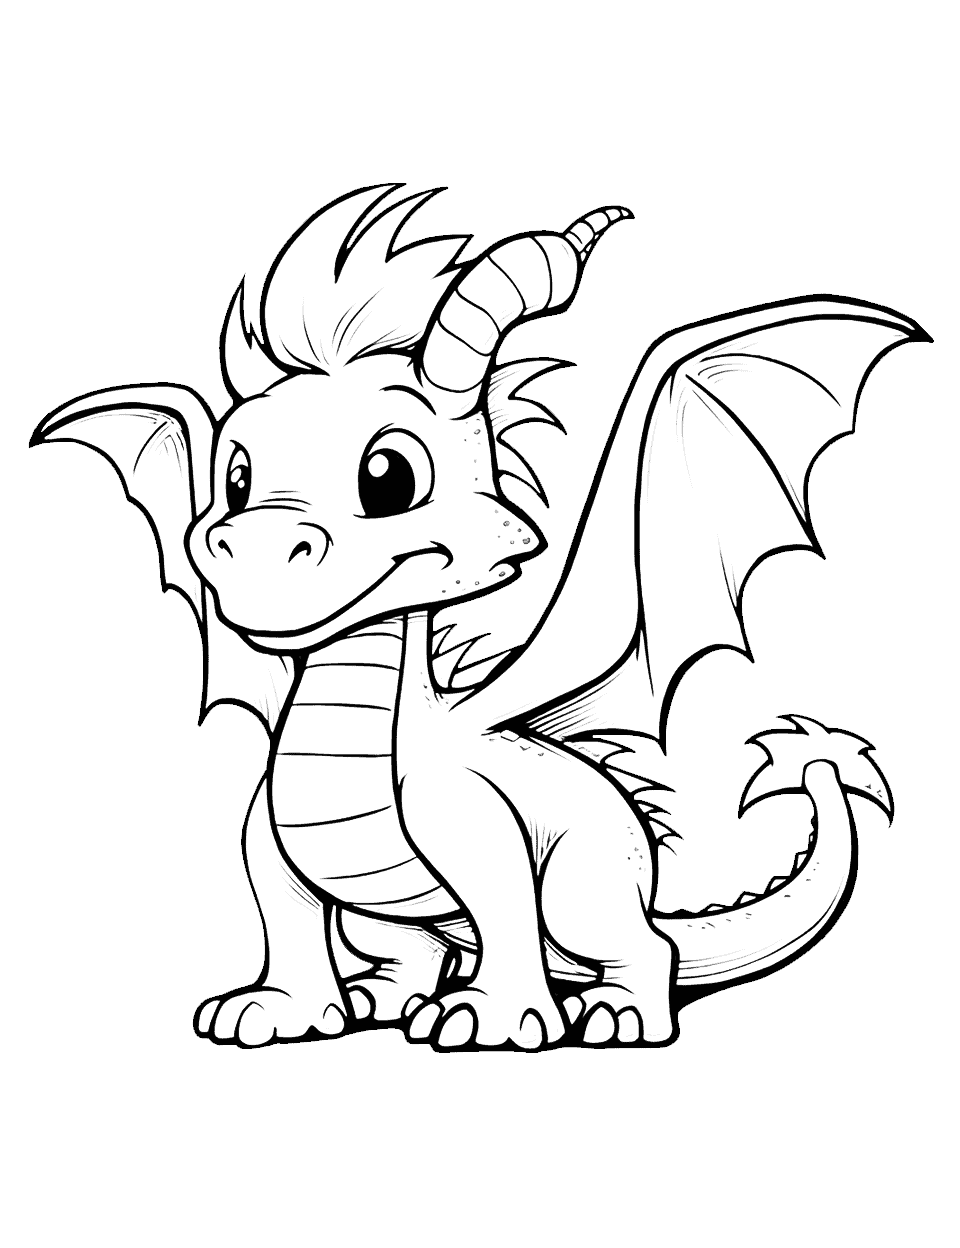 Dragon coloring pages free printable sheets